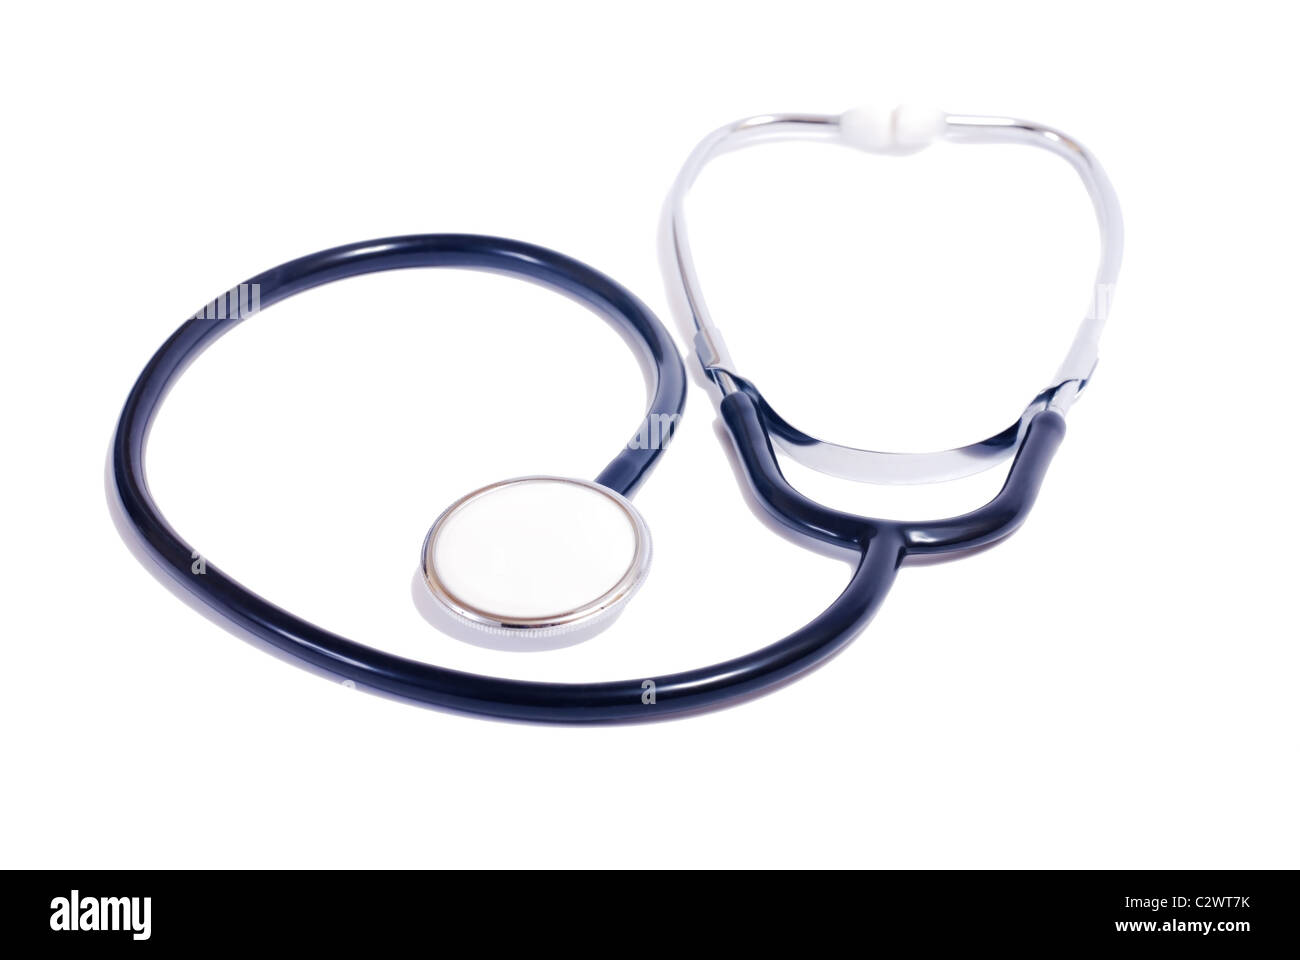 personal diagnostic instrument stethoscope Stock Photo